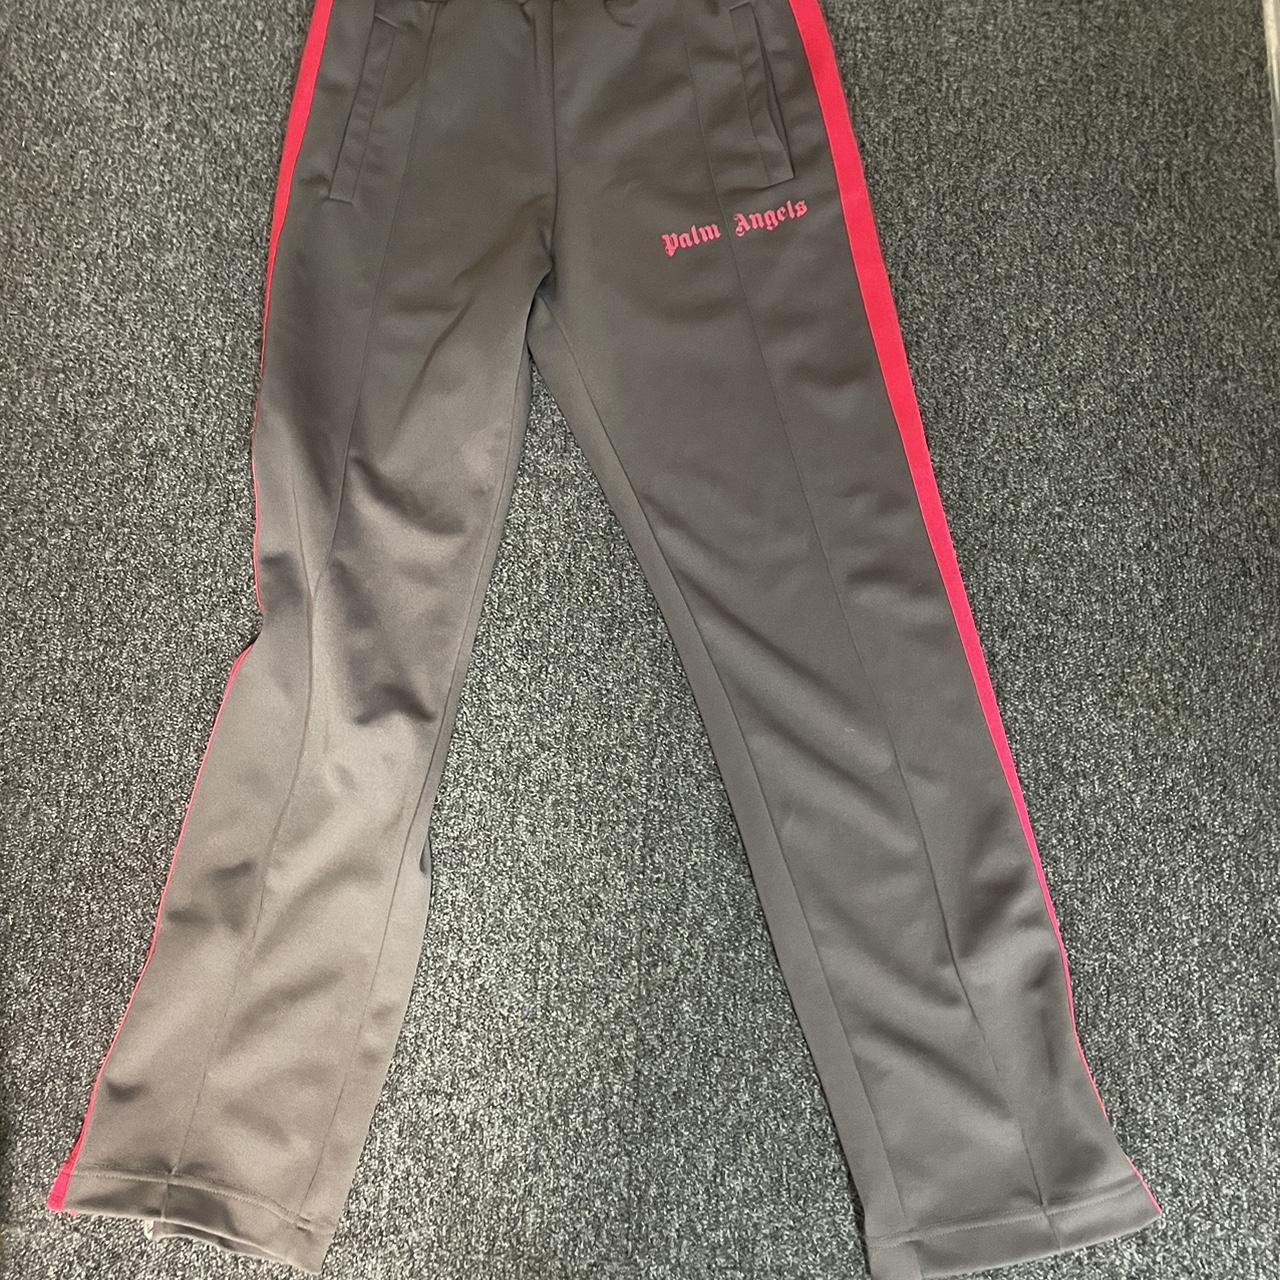 Palm angels grey and pink joggers • lovey colour way... - Depop